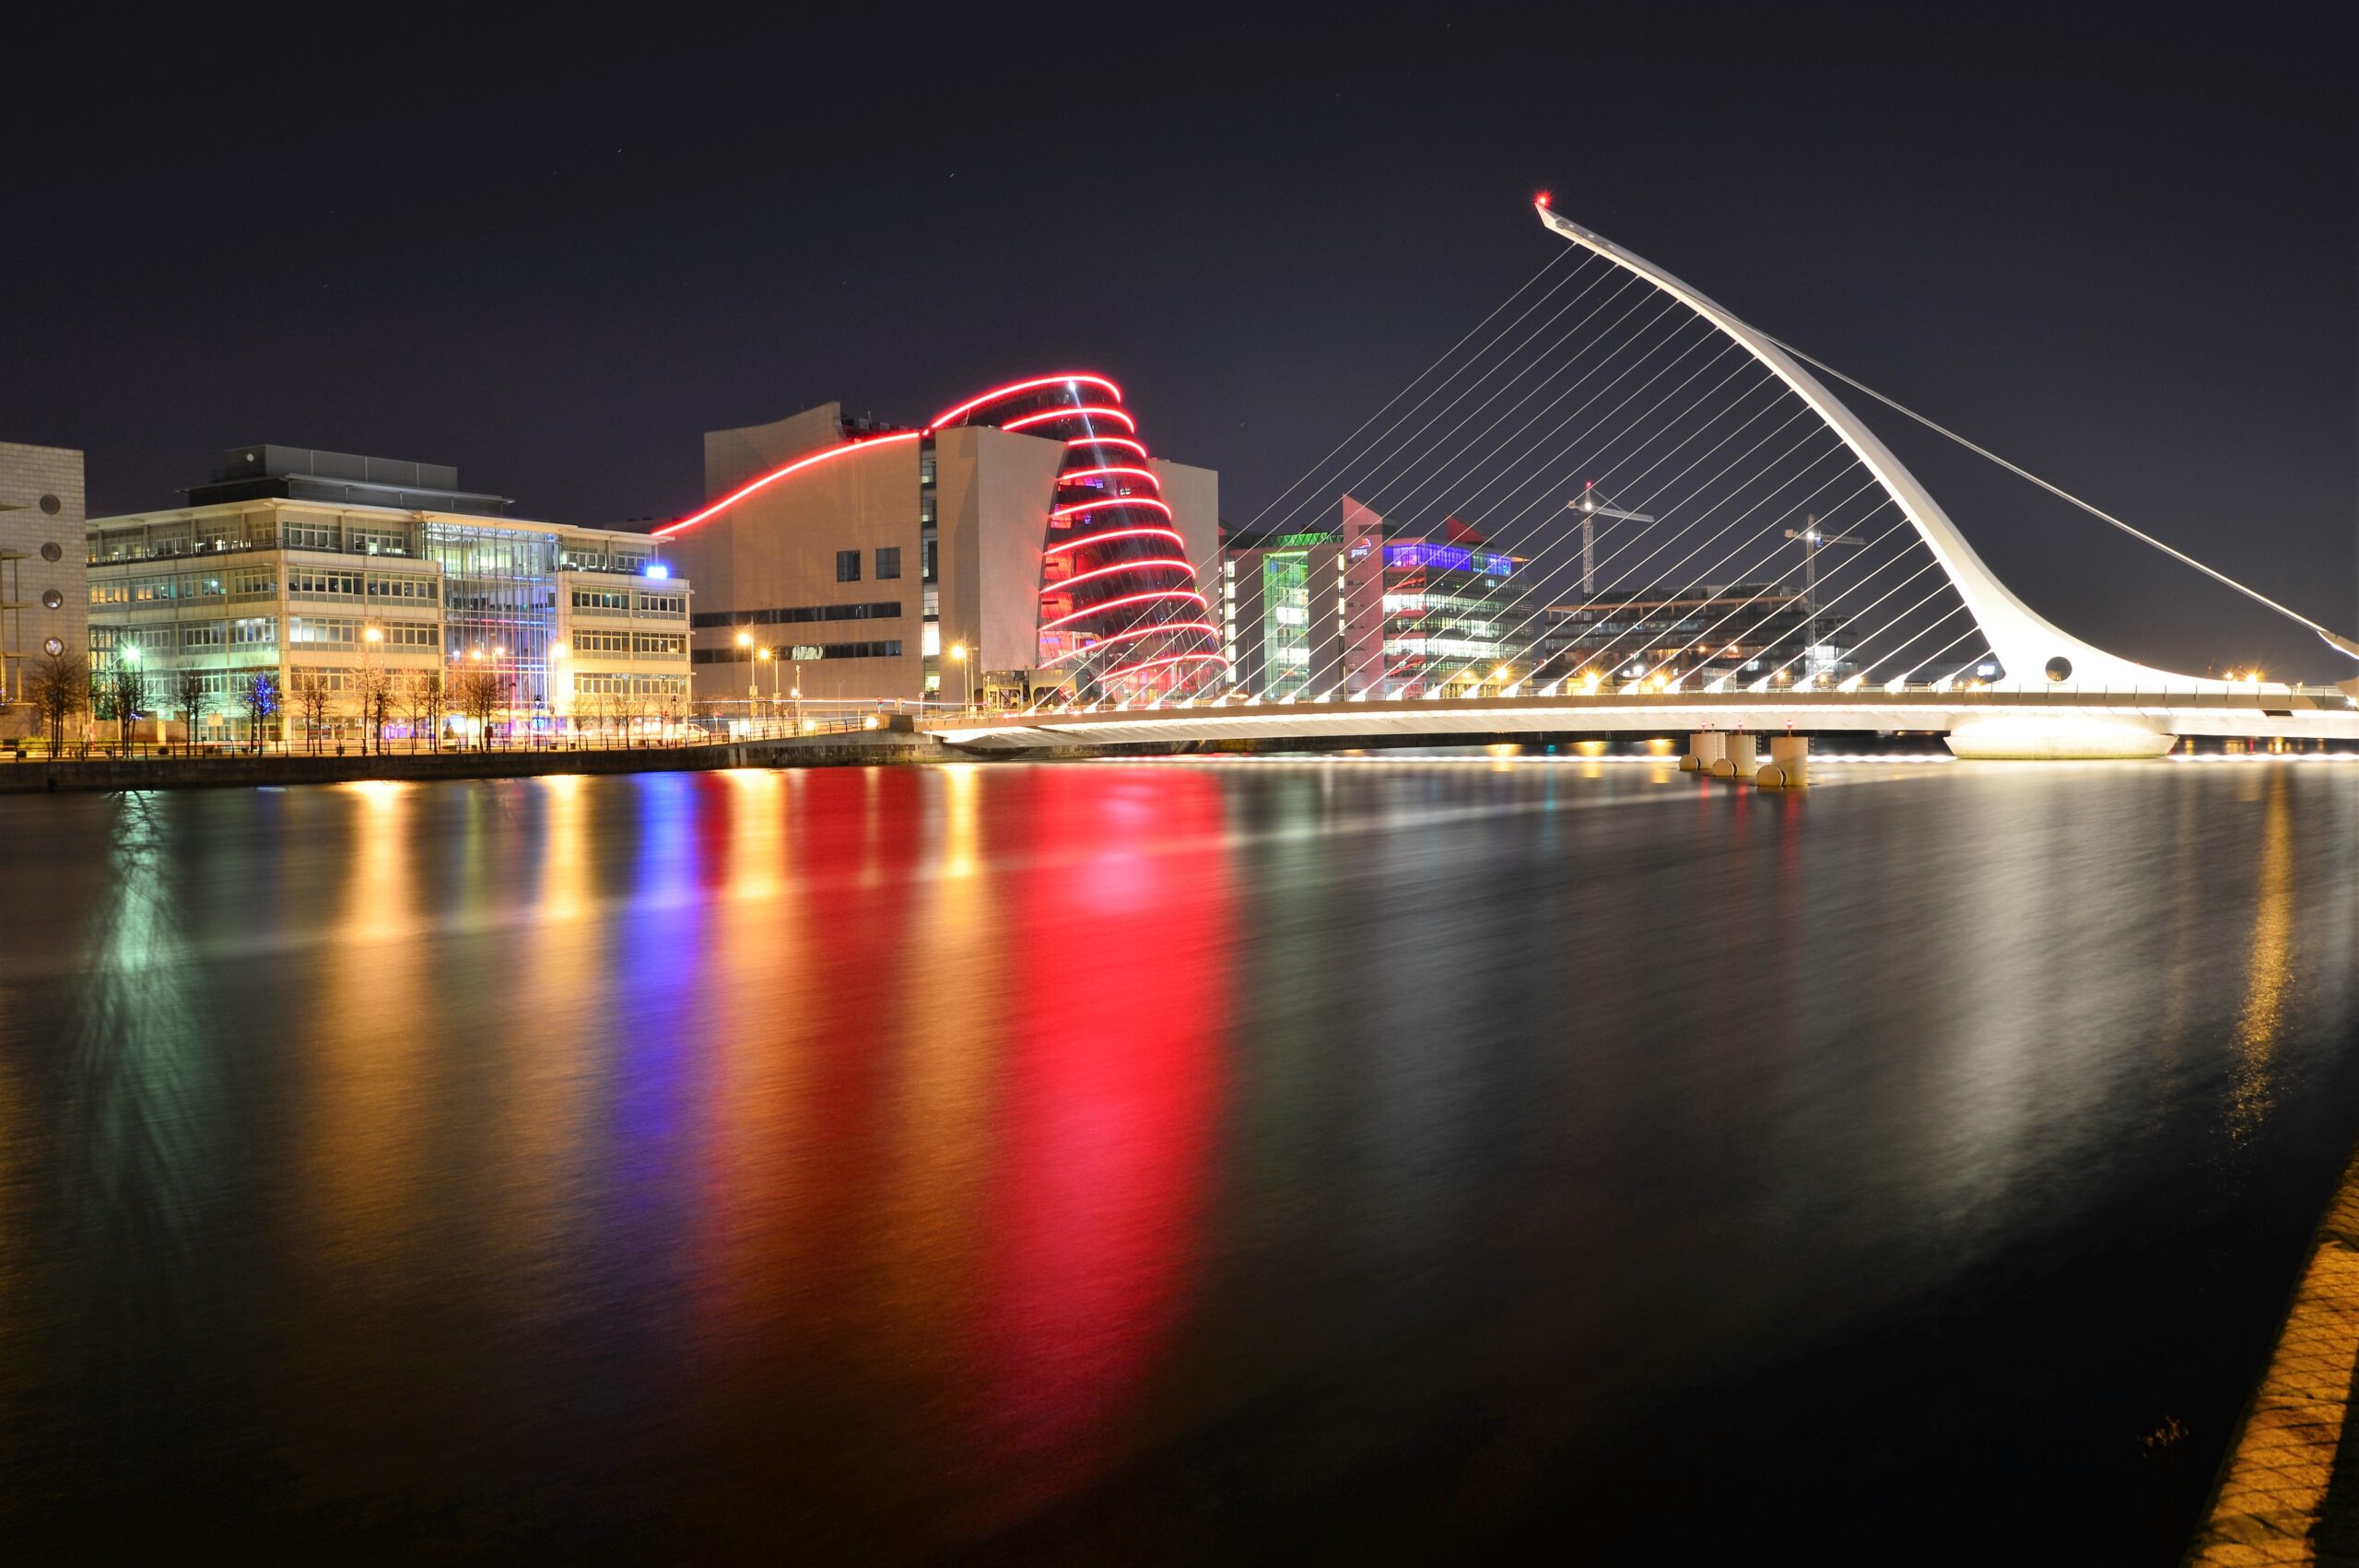 Here’s your chance to attend the Dublin Tech Summit with the Malta Chamber’s Tech.mt